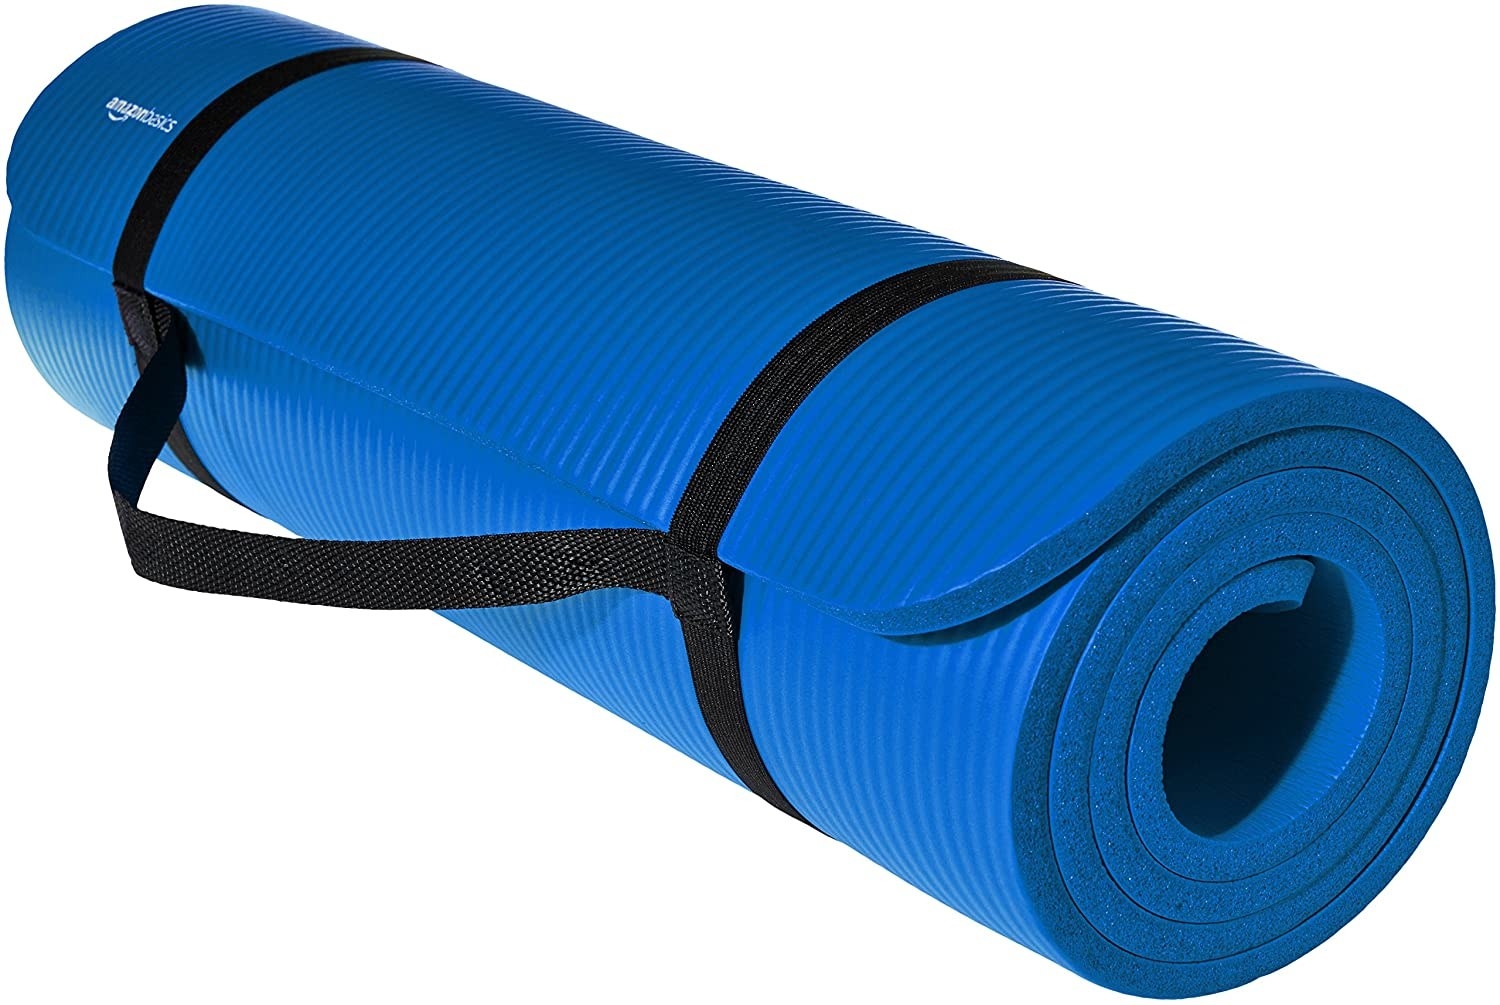 A rolled and closed up blue yoga mat with a black carry handle